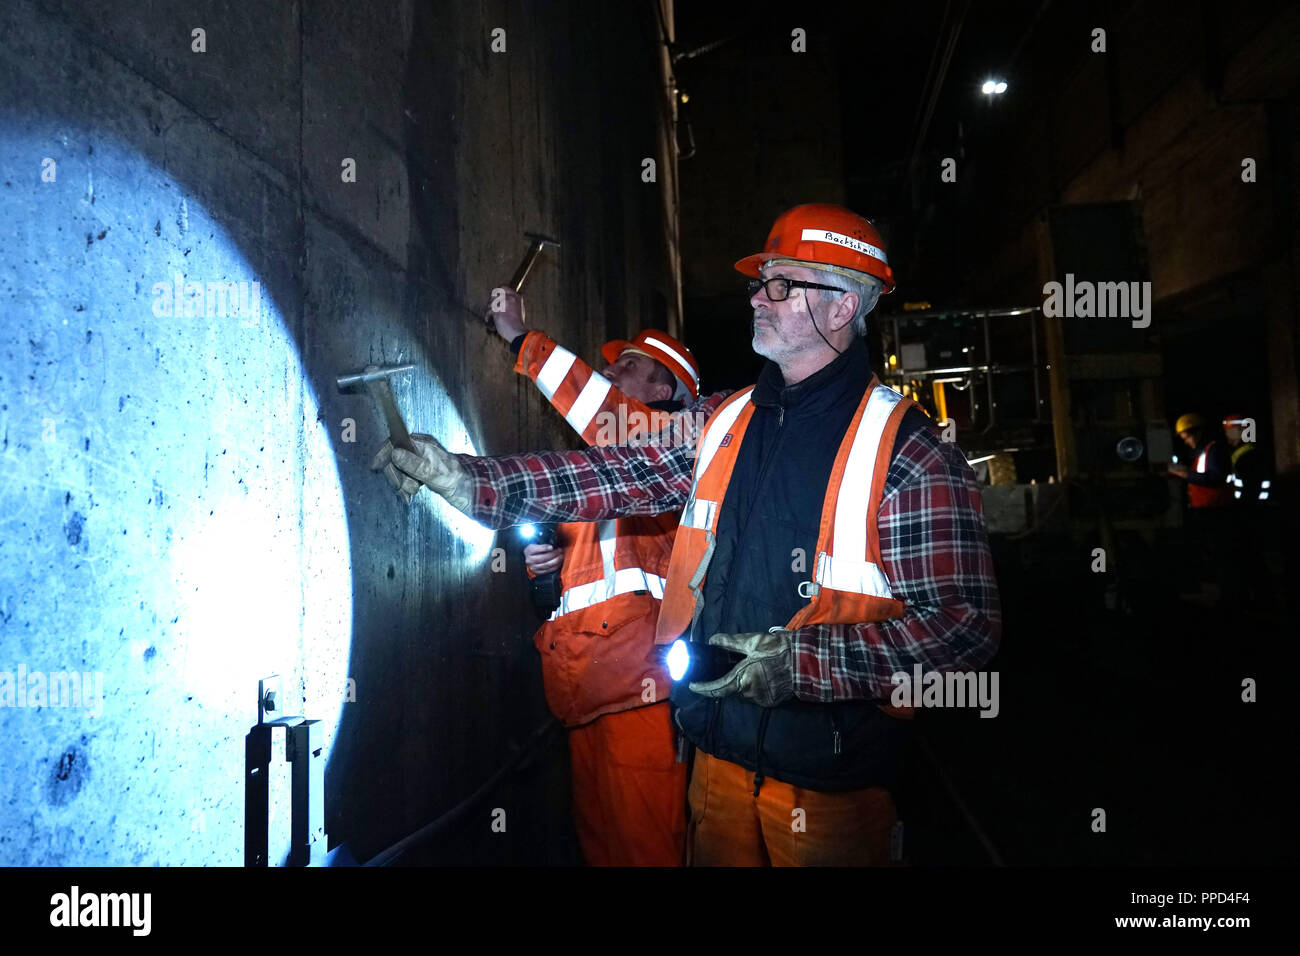 During the nighttime inspection experts of the Munich S-Bahn tunnel look for attrition and damage and mend broken bodies. The photo shows building inspector Erwin Bachschmidt examines a tunnel wall under the Marienplatz. Stock Photo